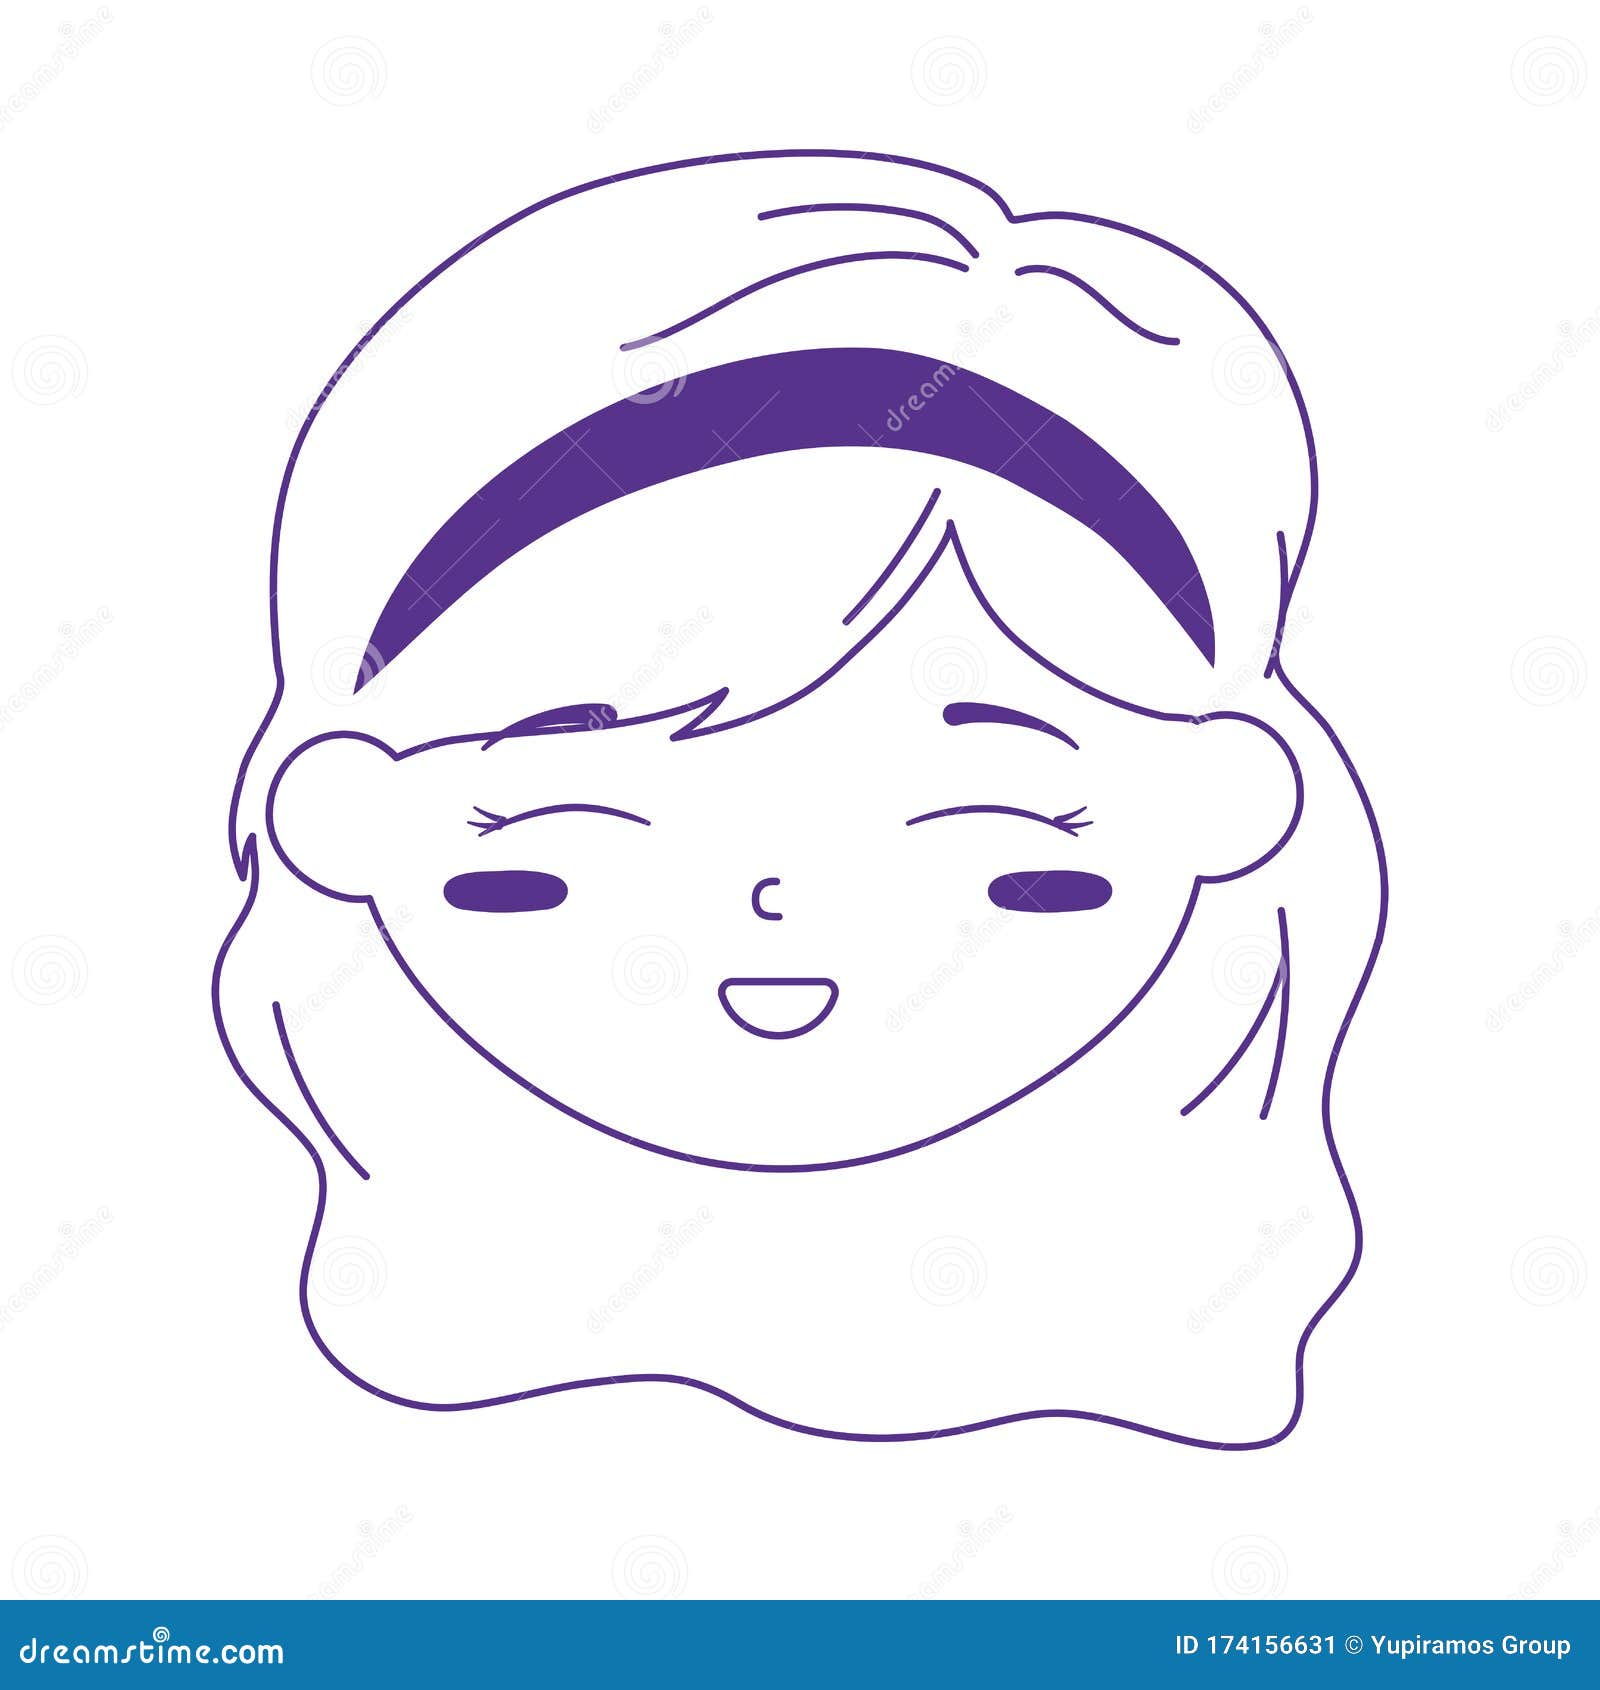 Featured image of post Smiley Face Smile Drawing Images Can be used with the silhouette cutting machines cricut design space and other machines that accept svg